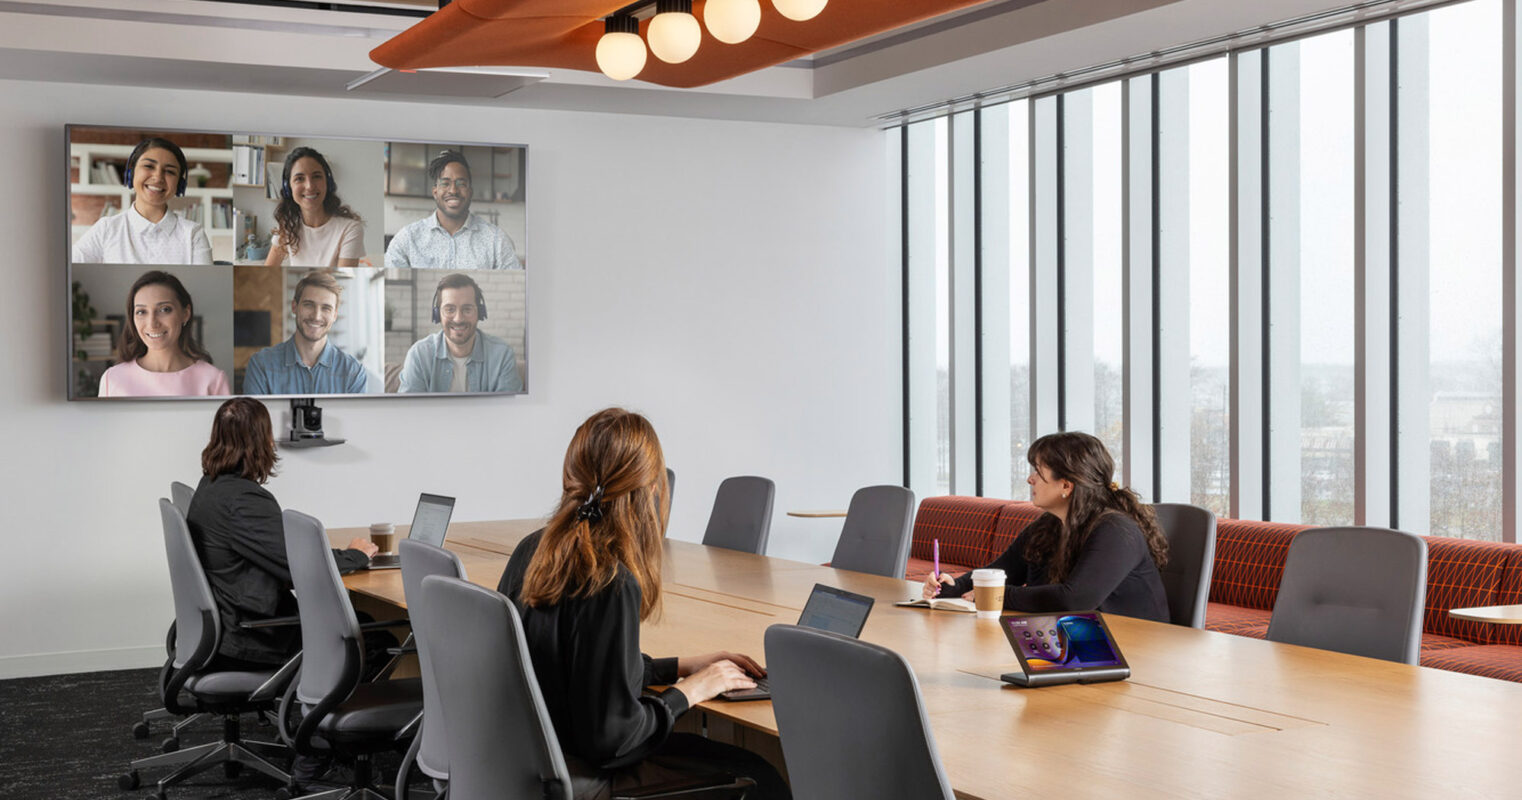 Modern conference room featuring a large wooden table, surrounded by ergonomic chairs and paneled with floor-to-ceiling windows. Overhead, an array of circular pendant lights adds warmth. On the wall, a video conference call is in progress, blending in-person and virtual collaboration.